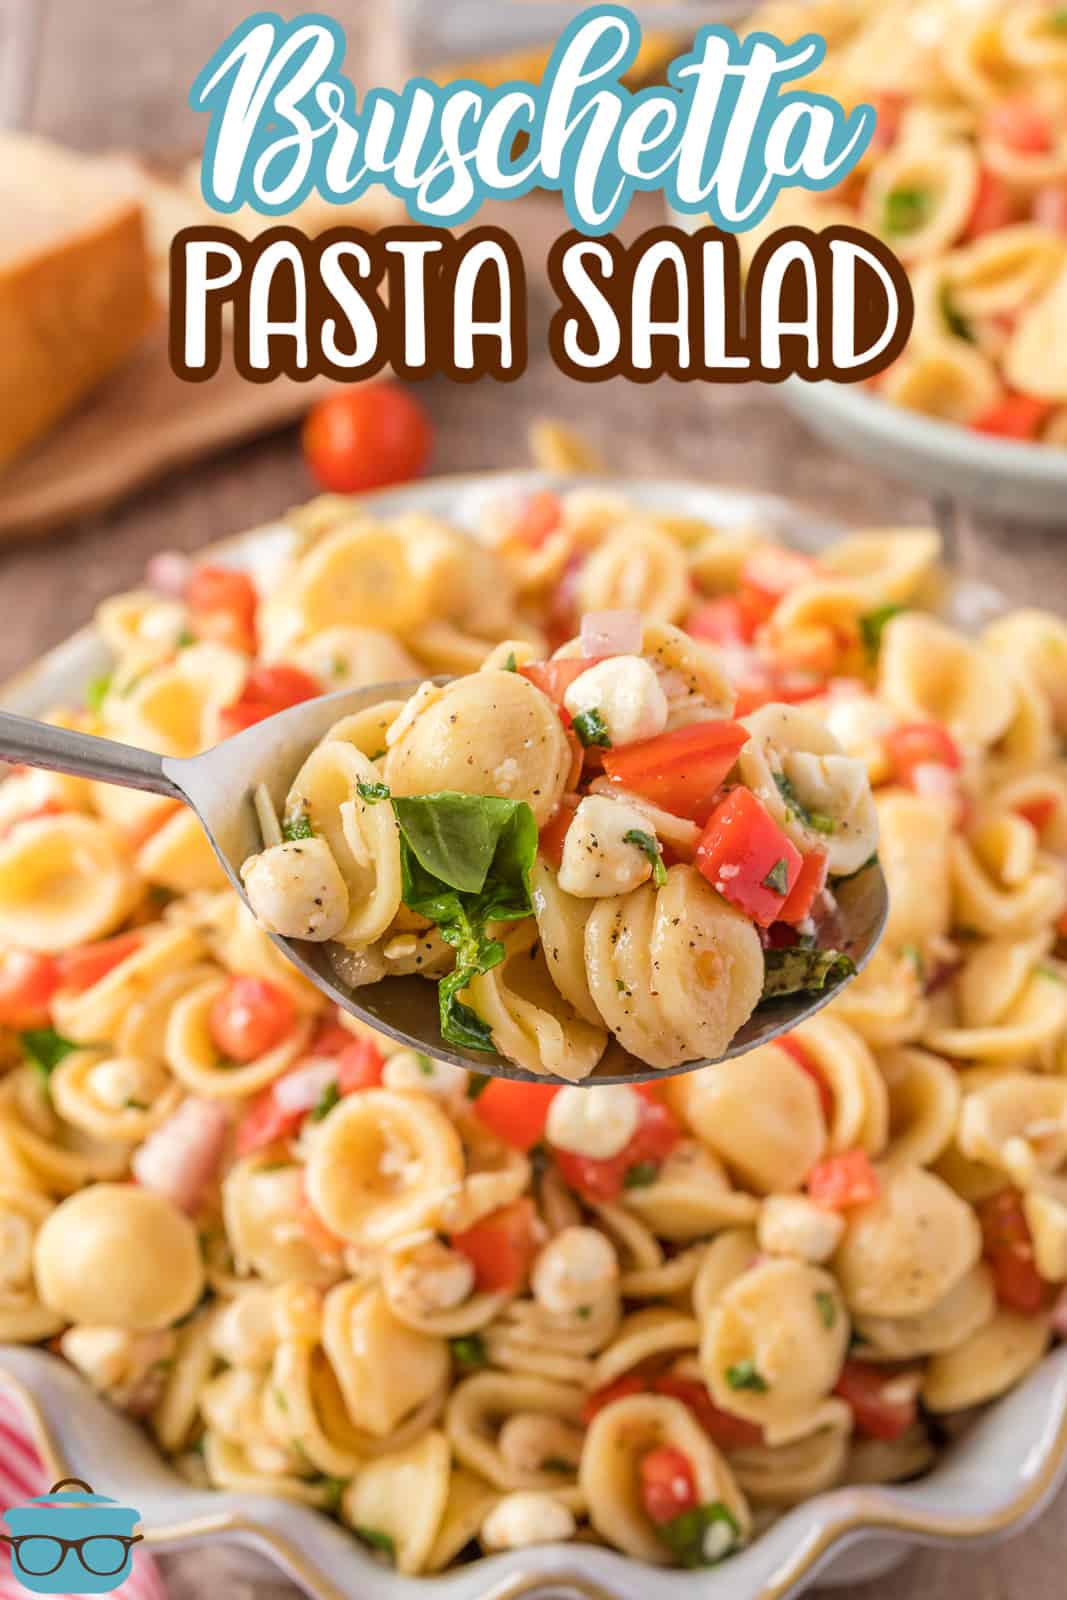 Spoon holding up some of the Bruschetta Pasta Salad from bowl Pinterest image.